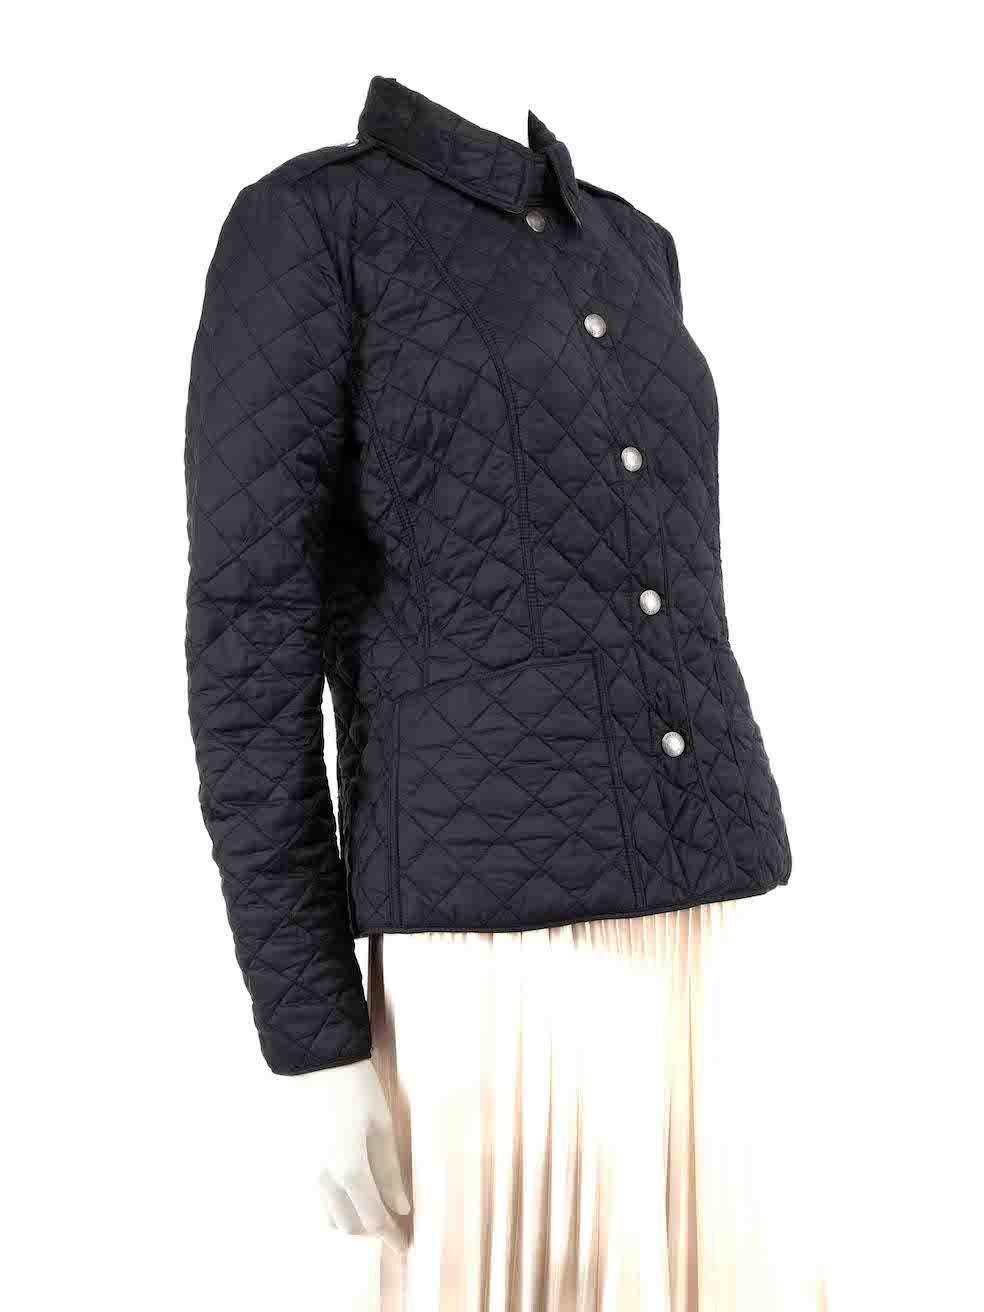 CONDITION is Good. Minor wear to jacket is evident. Light wear to the quilted stitching with a number of plucked and stray threads found throughout the exterior and lining on this used Burberry Brit designer resale item.
 
 
 
 Details
 
 
 Vintage